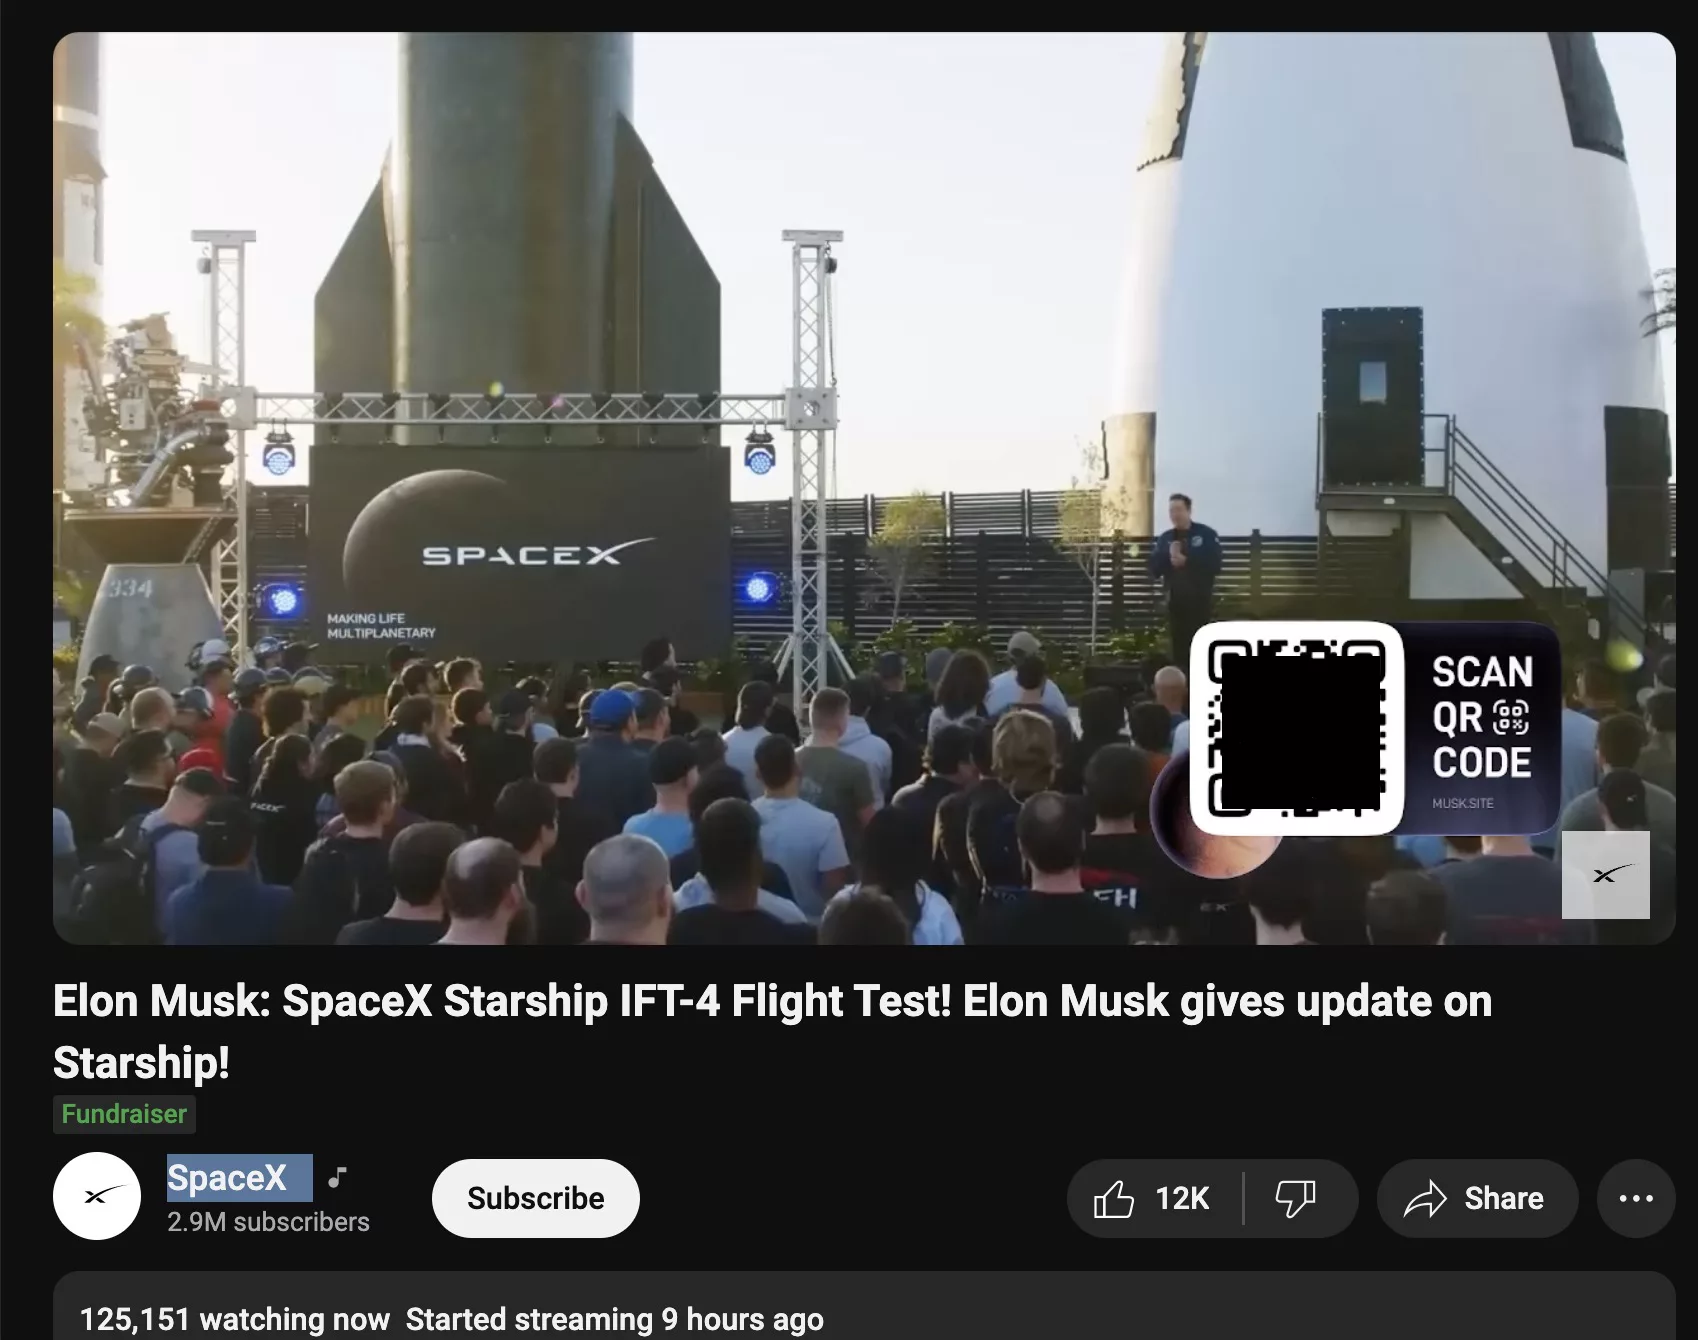 Scammers Ask for Crypto on Fake SpaceX Elon Musk Livestream by Dubbing an AI Voice Over Real Video: Report